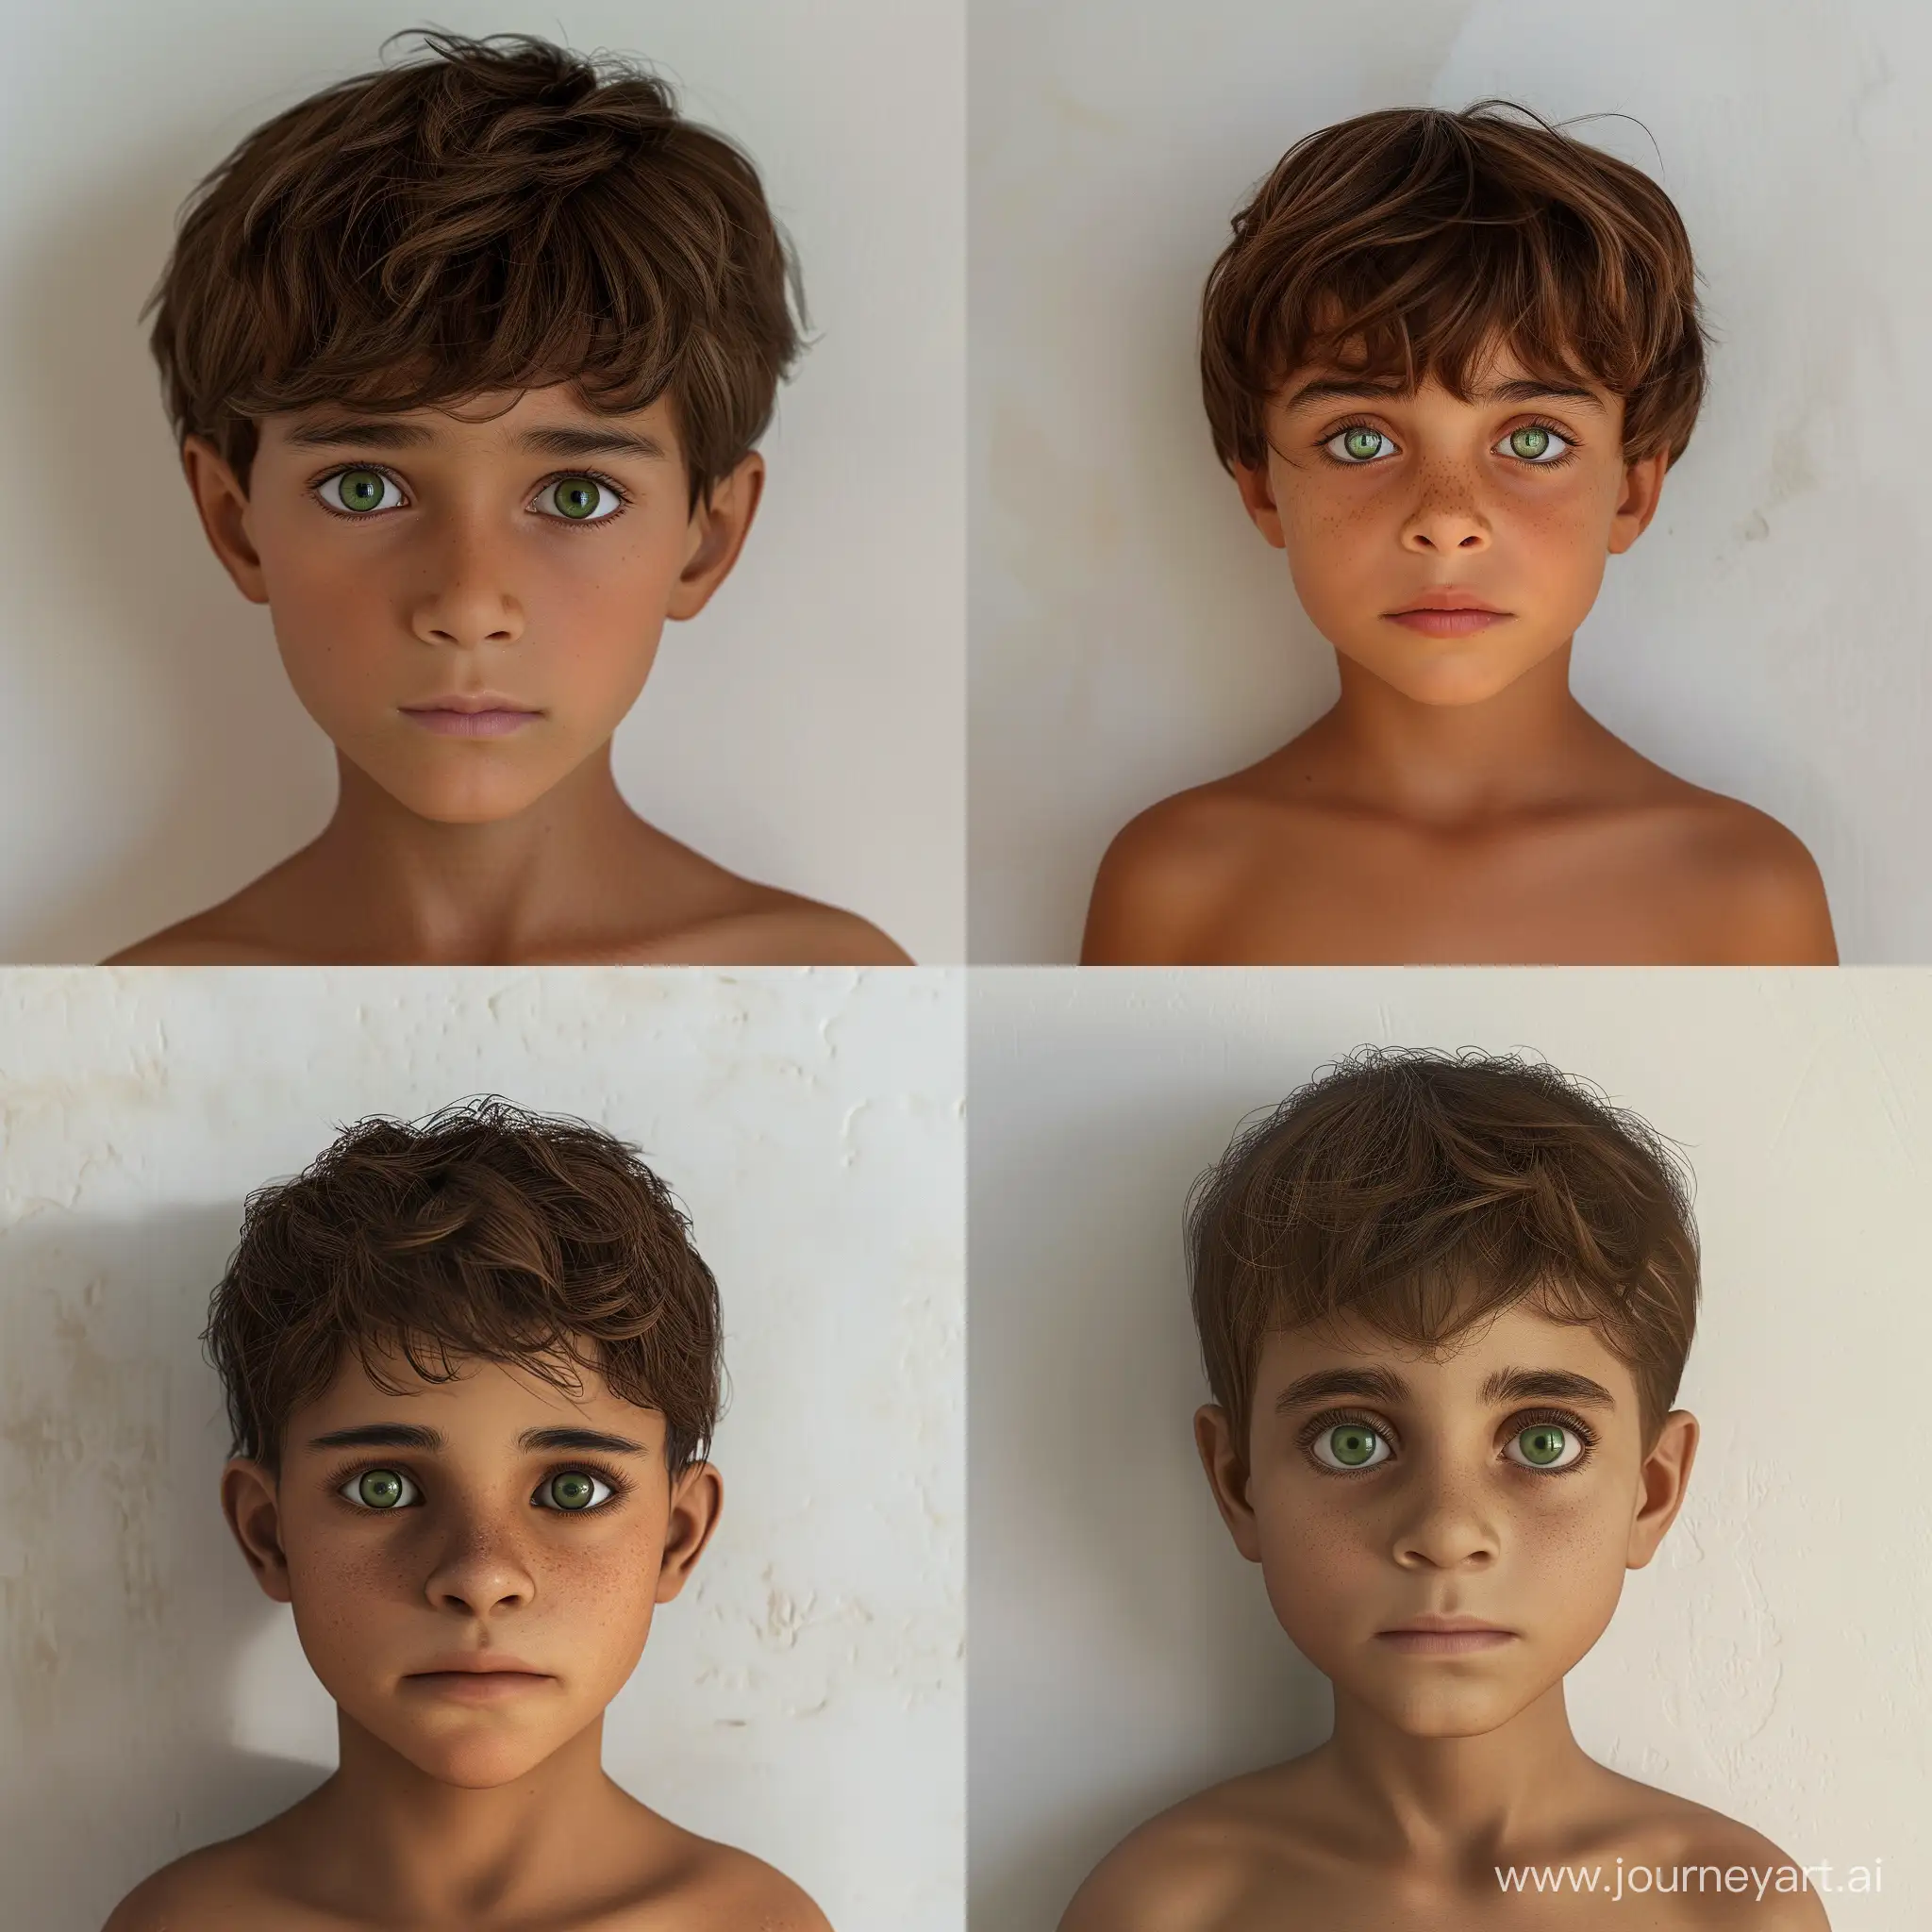 Camera image, photo realistic, full body of an Egyptian 8 year old child with a white wall background. The child has brown hair and green eyes.